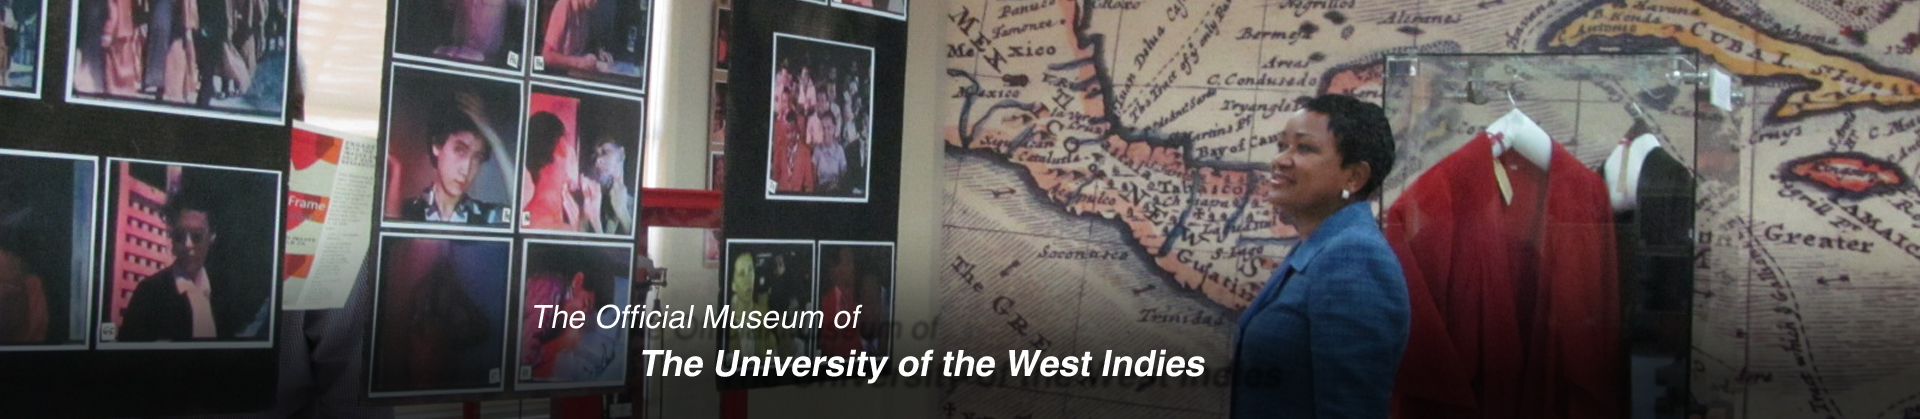 The Museum of The University of the West Indies